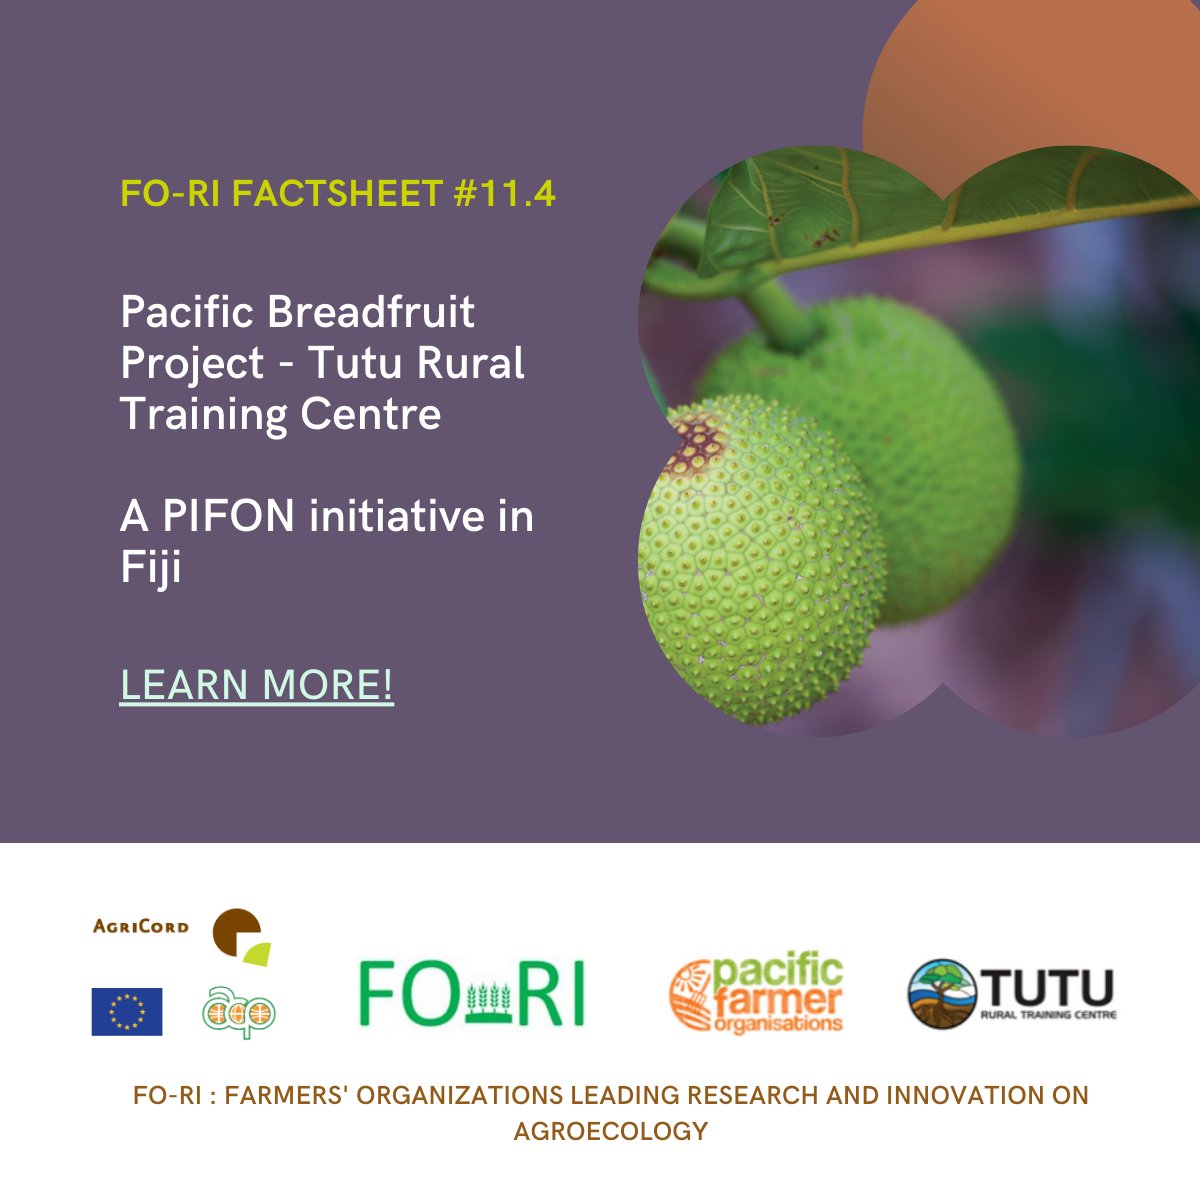 👩‍🌾By now, you probably know that, in 𝗣𝗮𝗰𝗶𝗳𝗶𝗰 𝗜𝘀𝗹𝗮𝗻𝗱𝘀, it’s all about #Breadfruit through the #FORI Programme! 🌱 Supported by the @EU_Commission & @PressACP 📌 𝗖𝗵𝗲𝗰𝗸 𝘁𝗵𝗲 𝗙𝗶𝗷𝗶'𝘀 𝗙𝗢𝗥𝗜 𝗙𝗮𝗰𝘁𝘀𝗵𝗲𝗲𝘁 𝗵𝗲𝗿𝗲: agricord.org/sites/default/… #Farmers